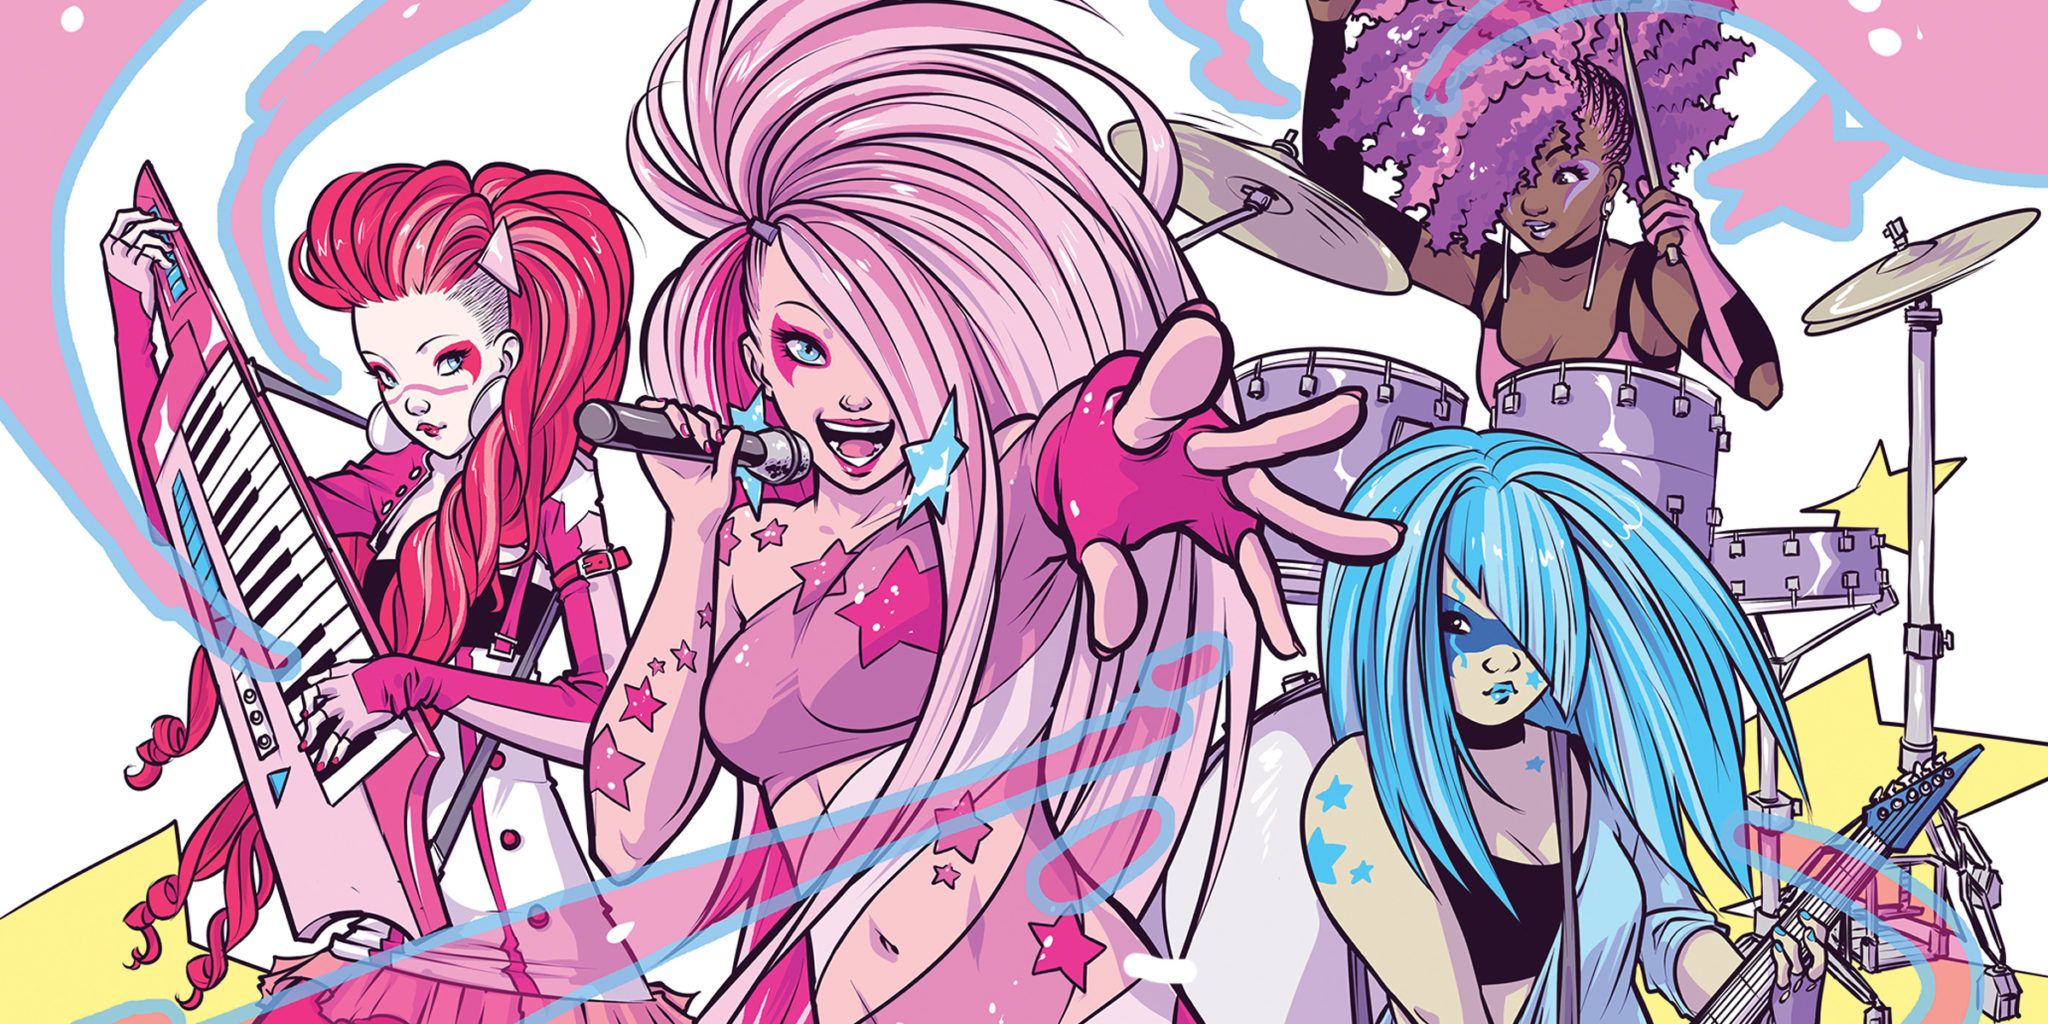 Jem And The Holograms singing in the Jem And The Holograms comic